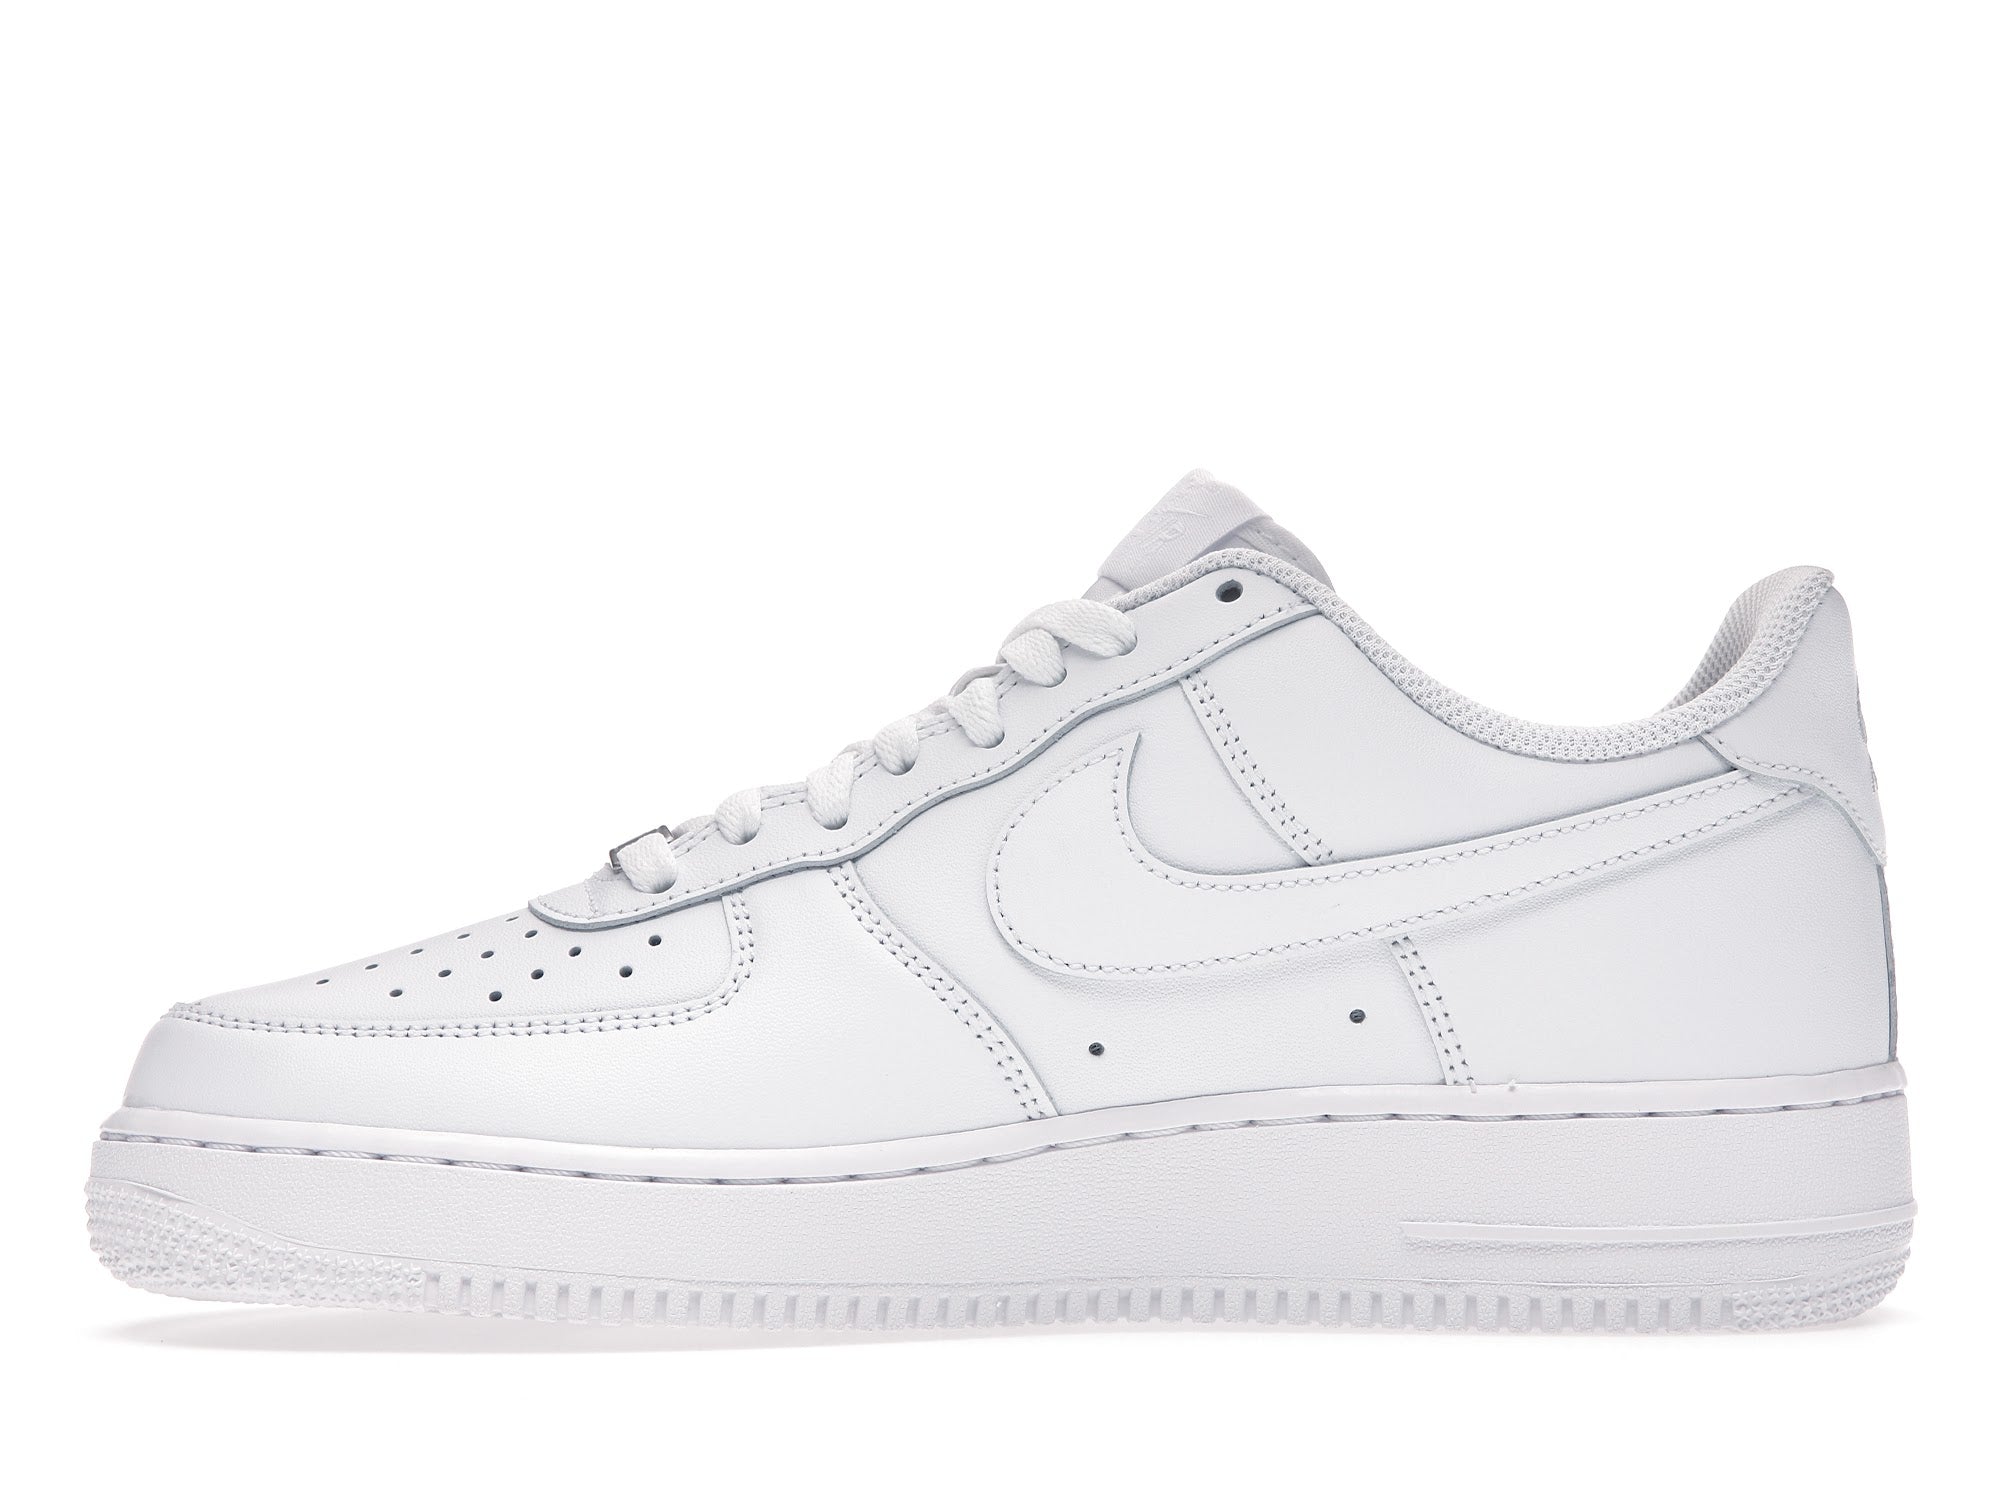 Nike Air Force 1 07 White/White Men's Retro Authentic SHOE BOX ONLY, CW2288-111